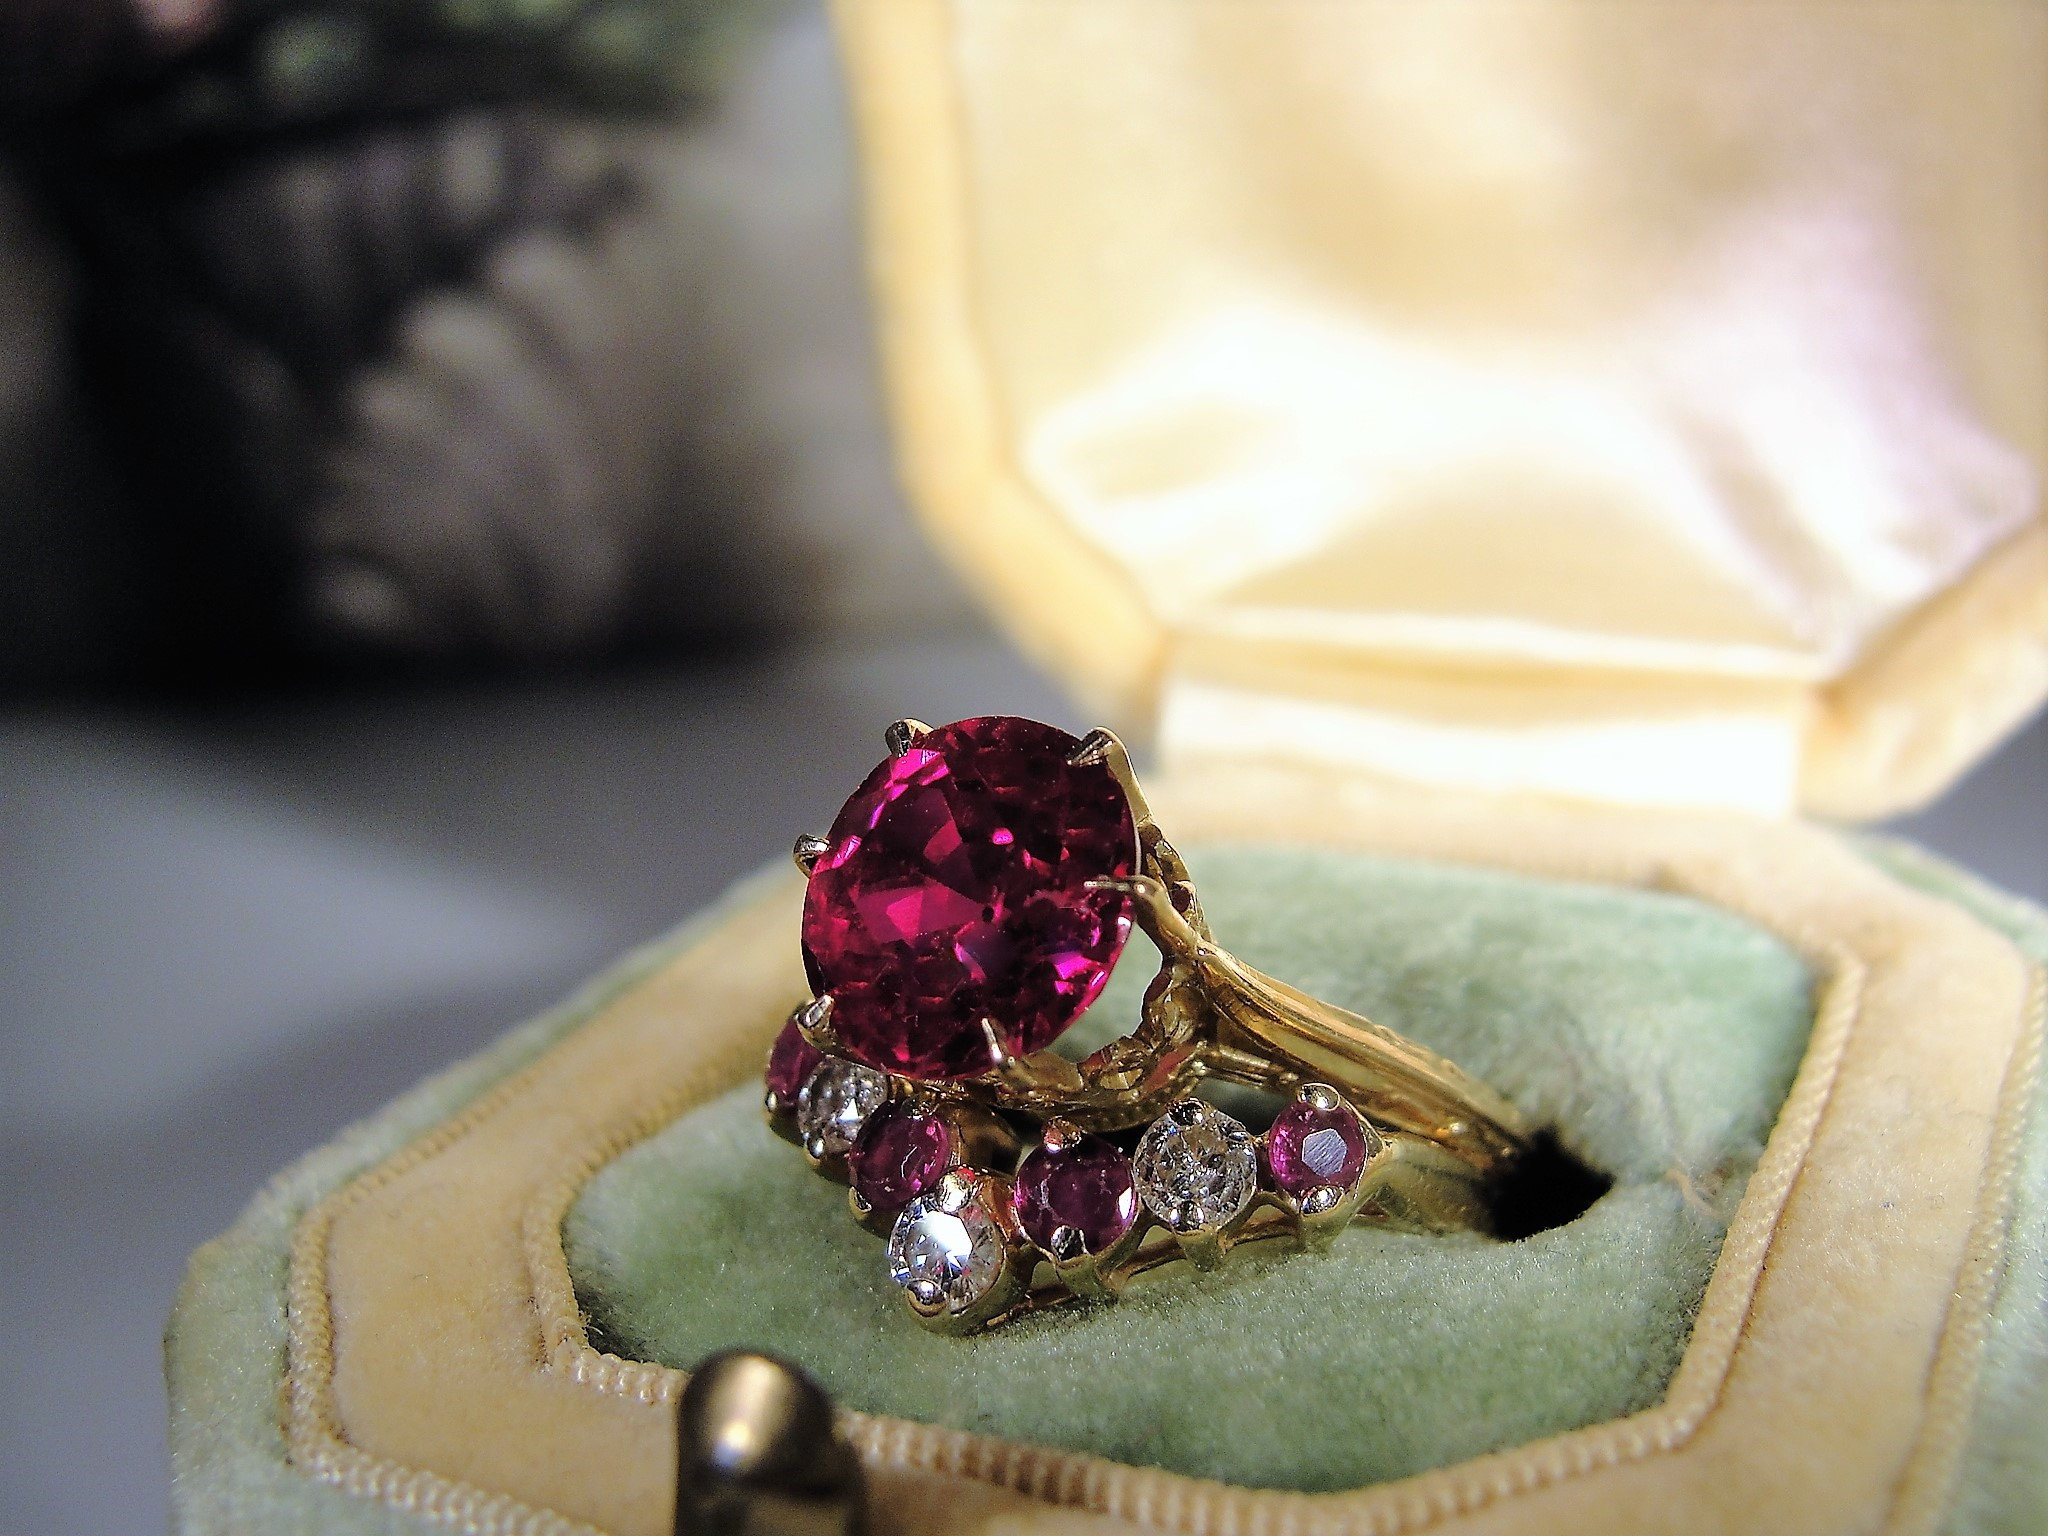 Reserved for Bella - 1st Payment: Victorian Bridal Rings, Ruby ...